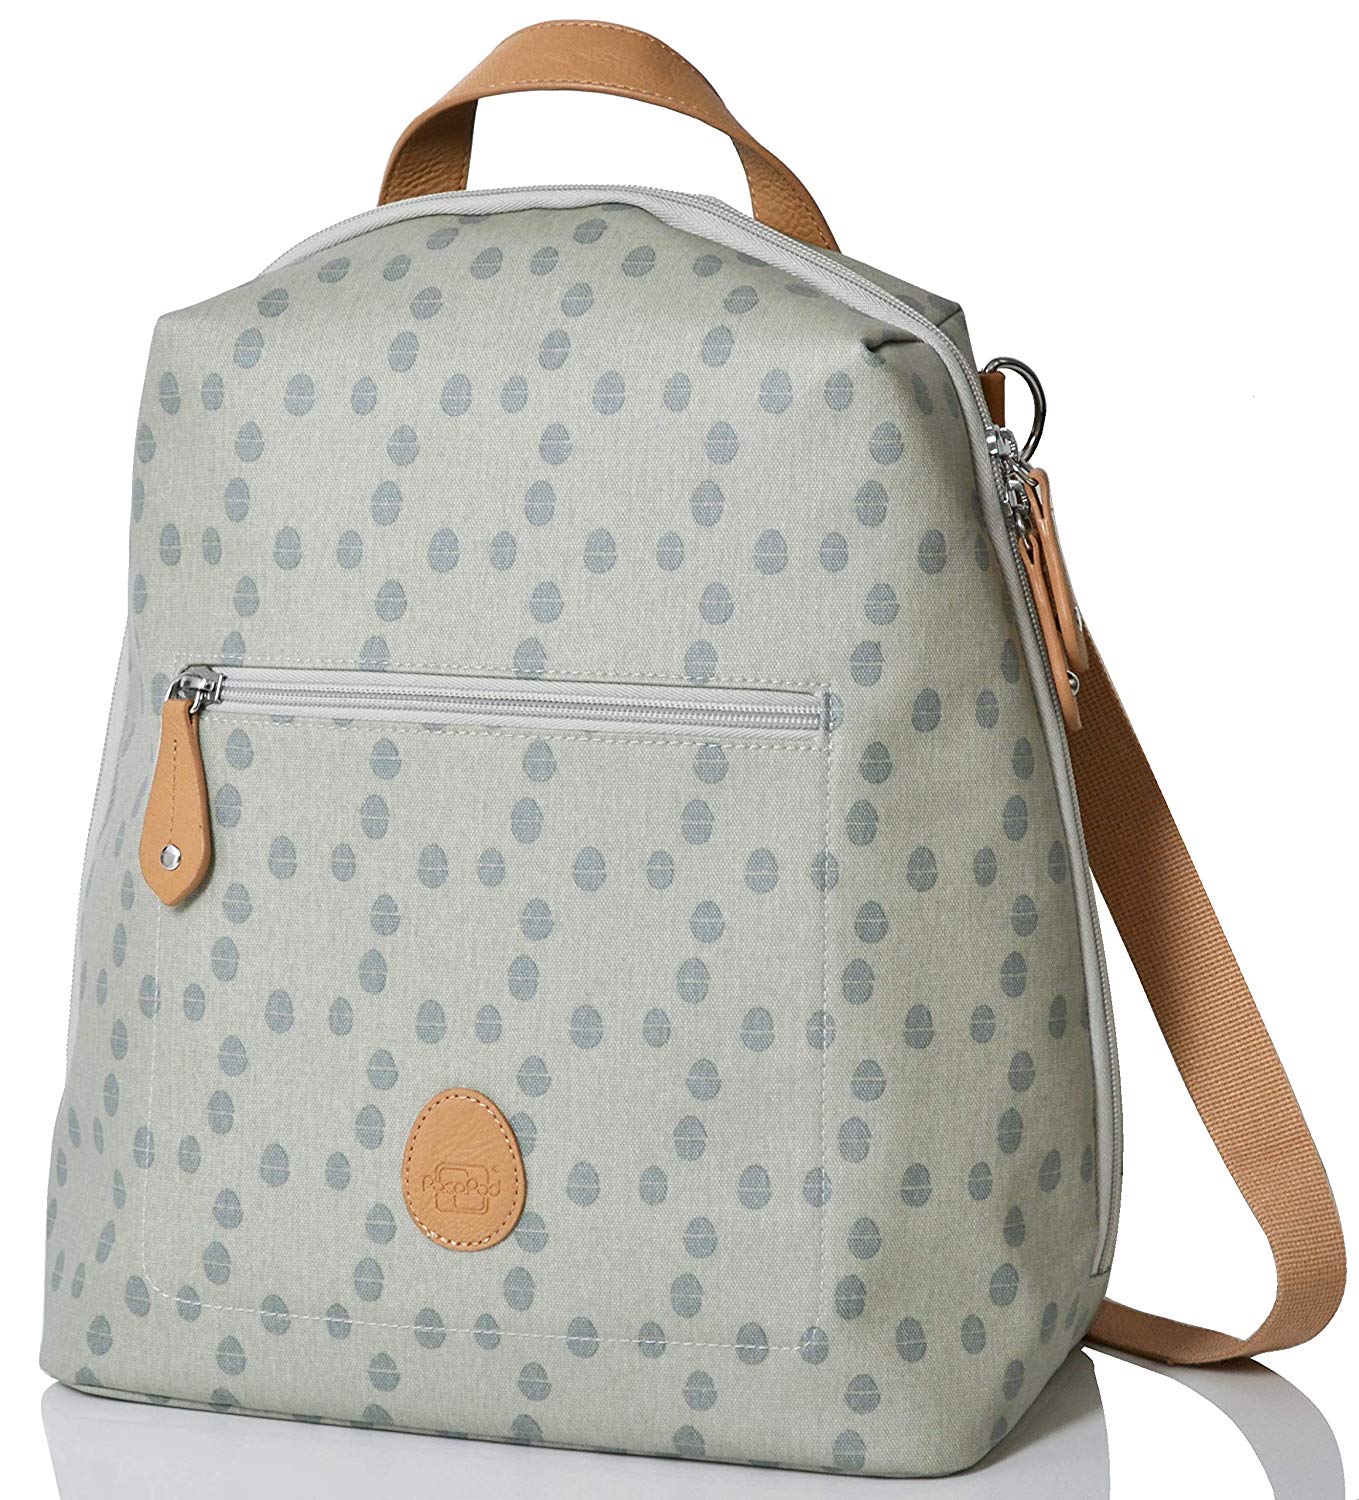 PacaPod Hartland Oyster Acorn Designer Baby Changing Bag - Luxury Neutral Backpack 3 in 1 Organiser System with Convertible Straps